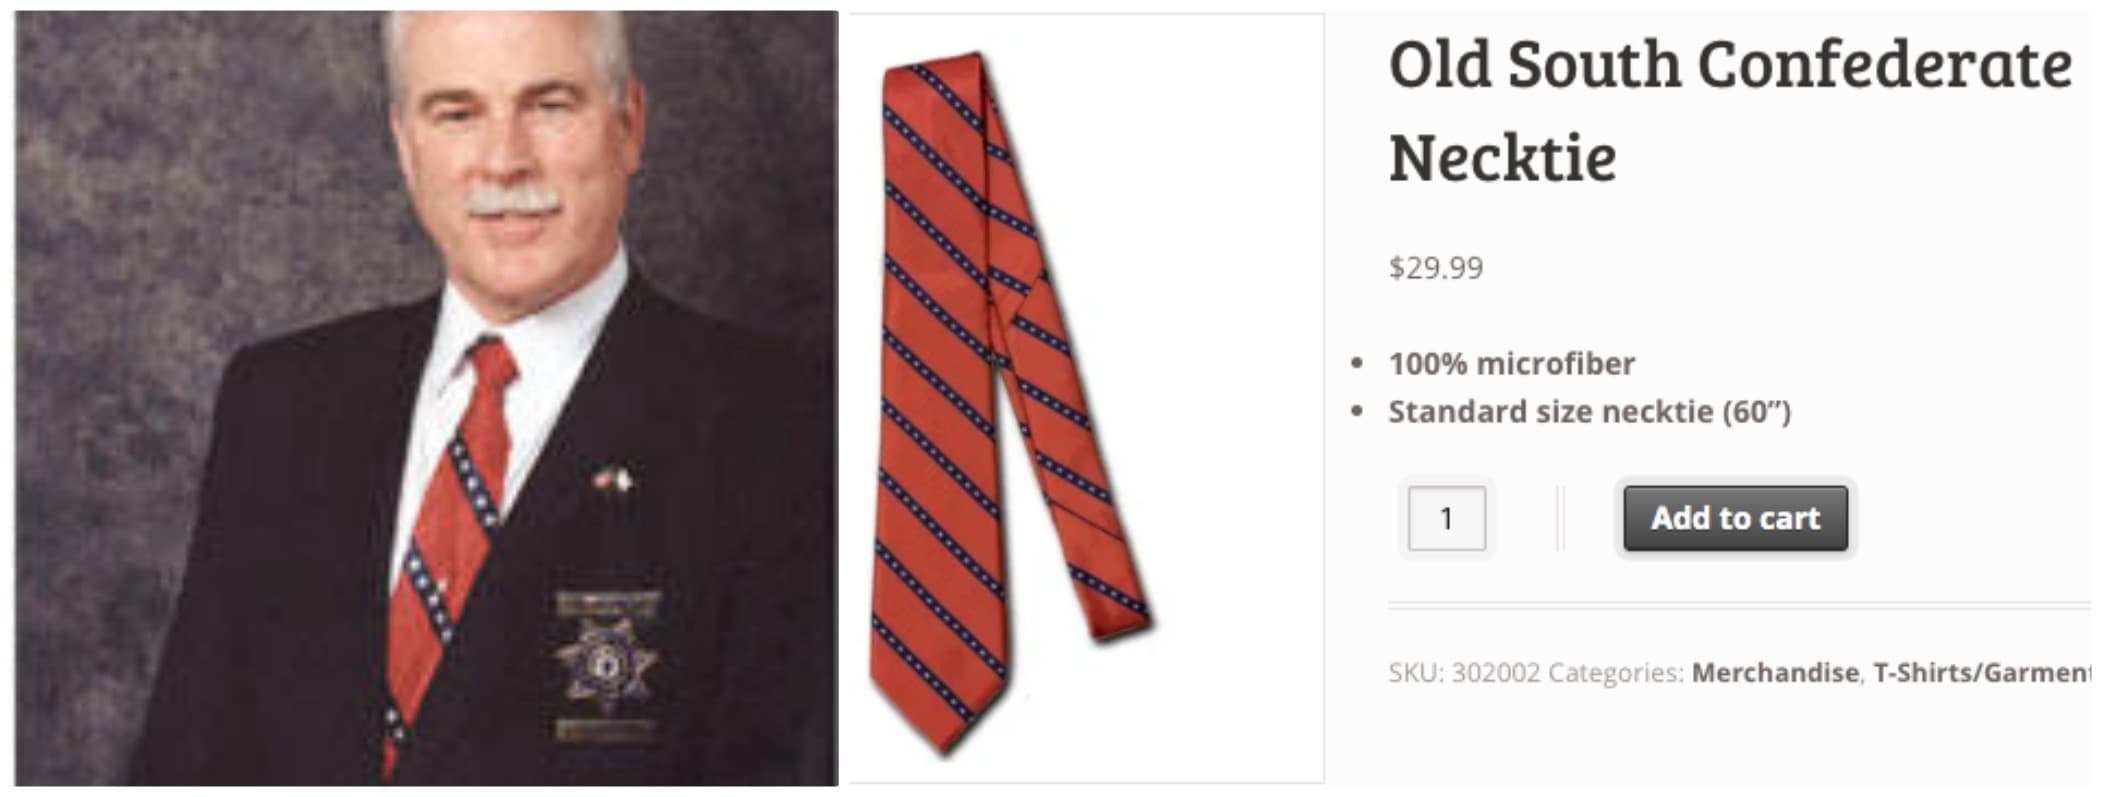 Left, a screenshot of Sheriff Thomas Hodgson's 2003 portrait featured on the Bristol County Sheriff's Office website. Right, a screenshot of a tie for sale on ConfederateShop.com. 